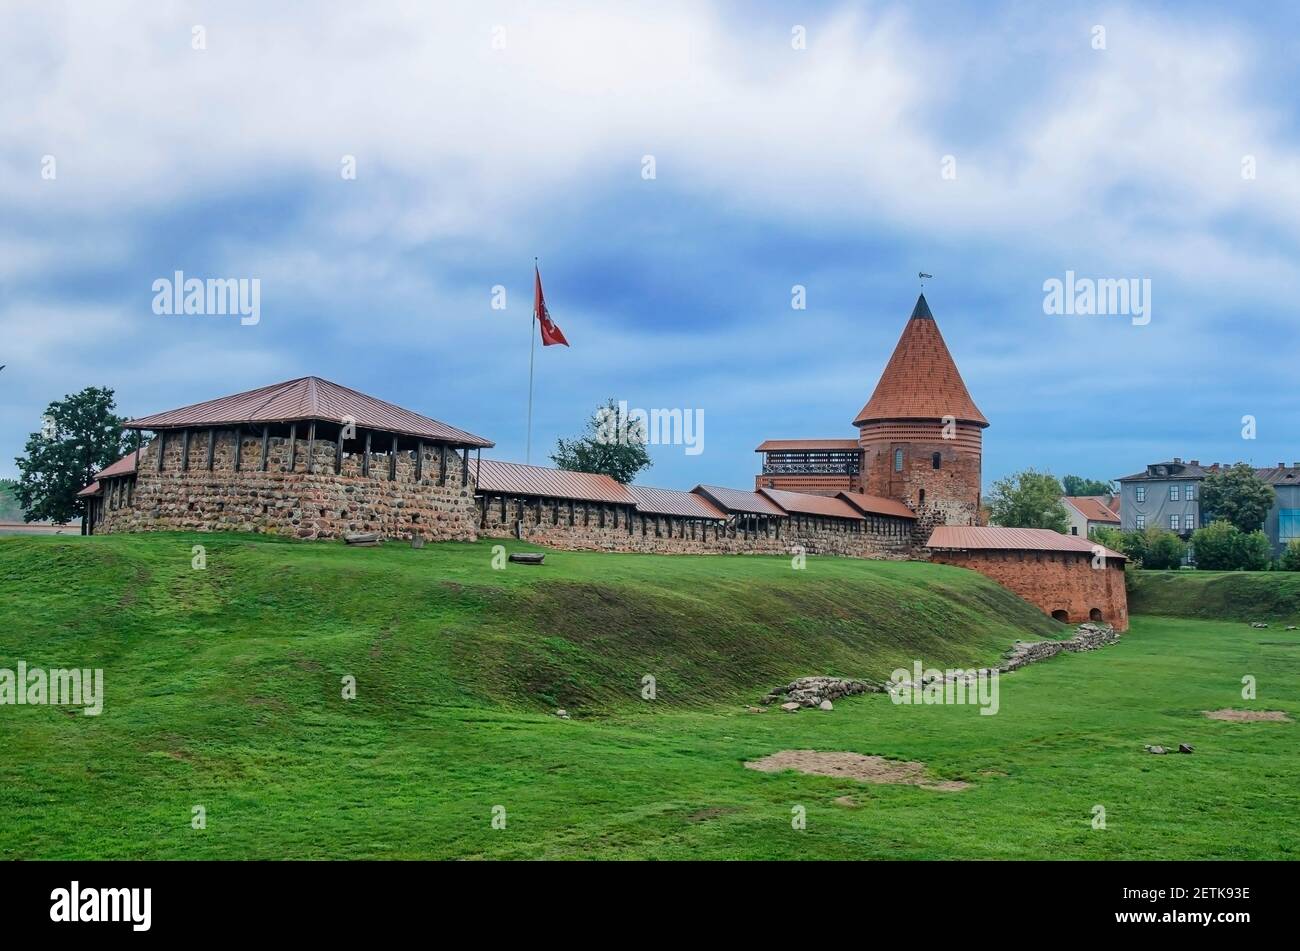 View of Kaunas castle, medieval fortress in Kaunas, Lithuania Stock Photo